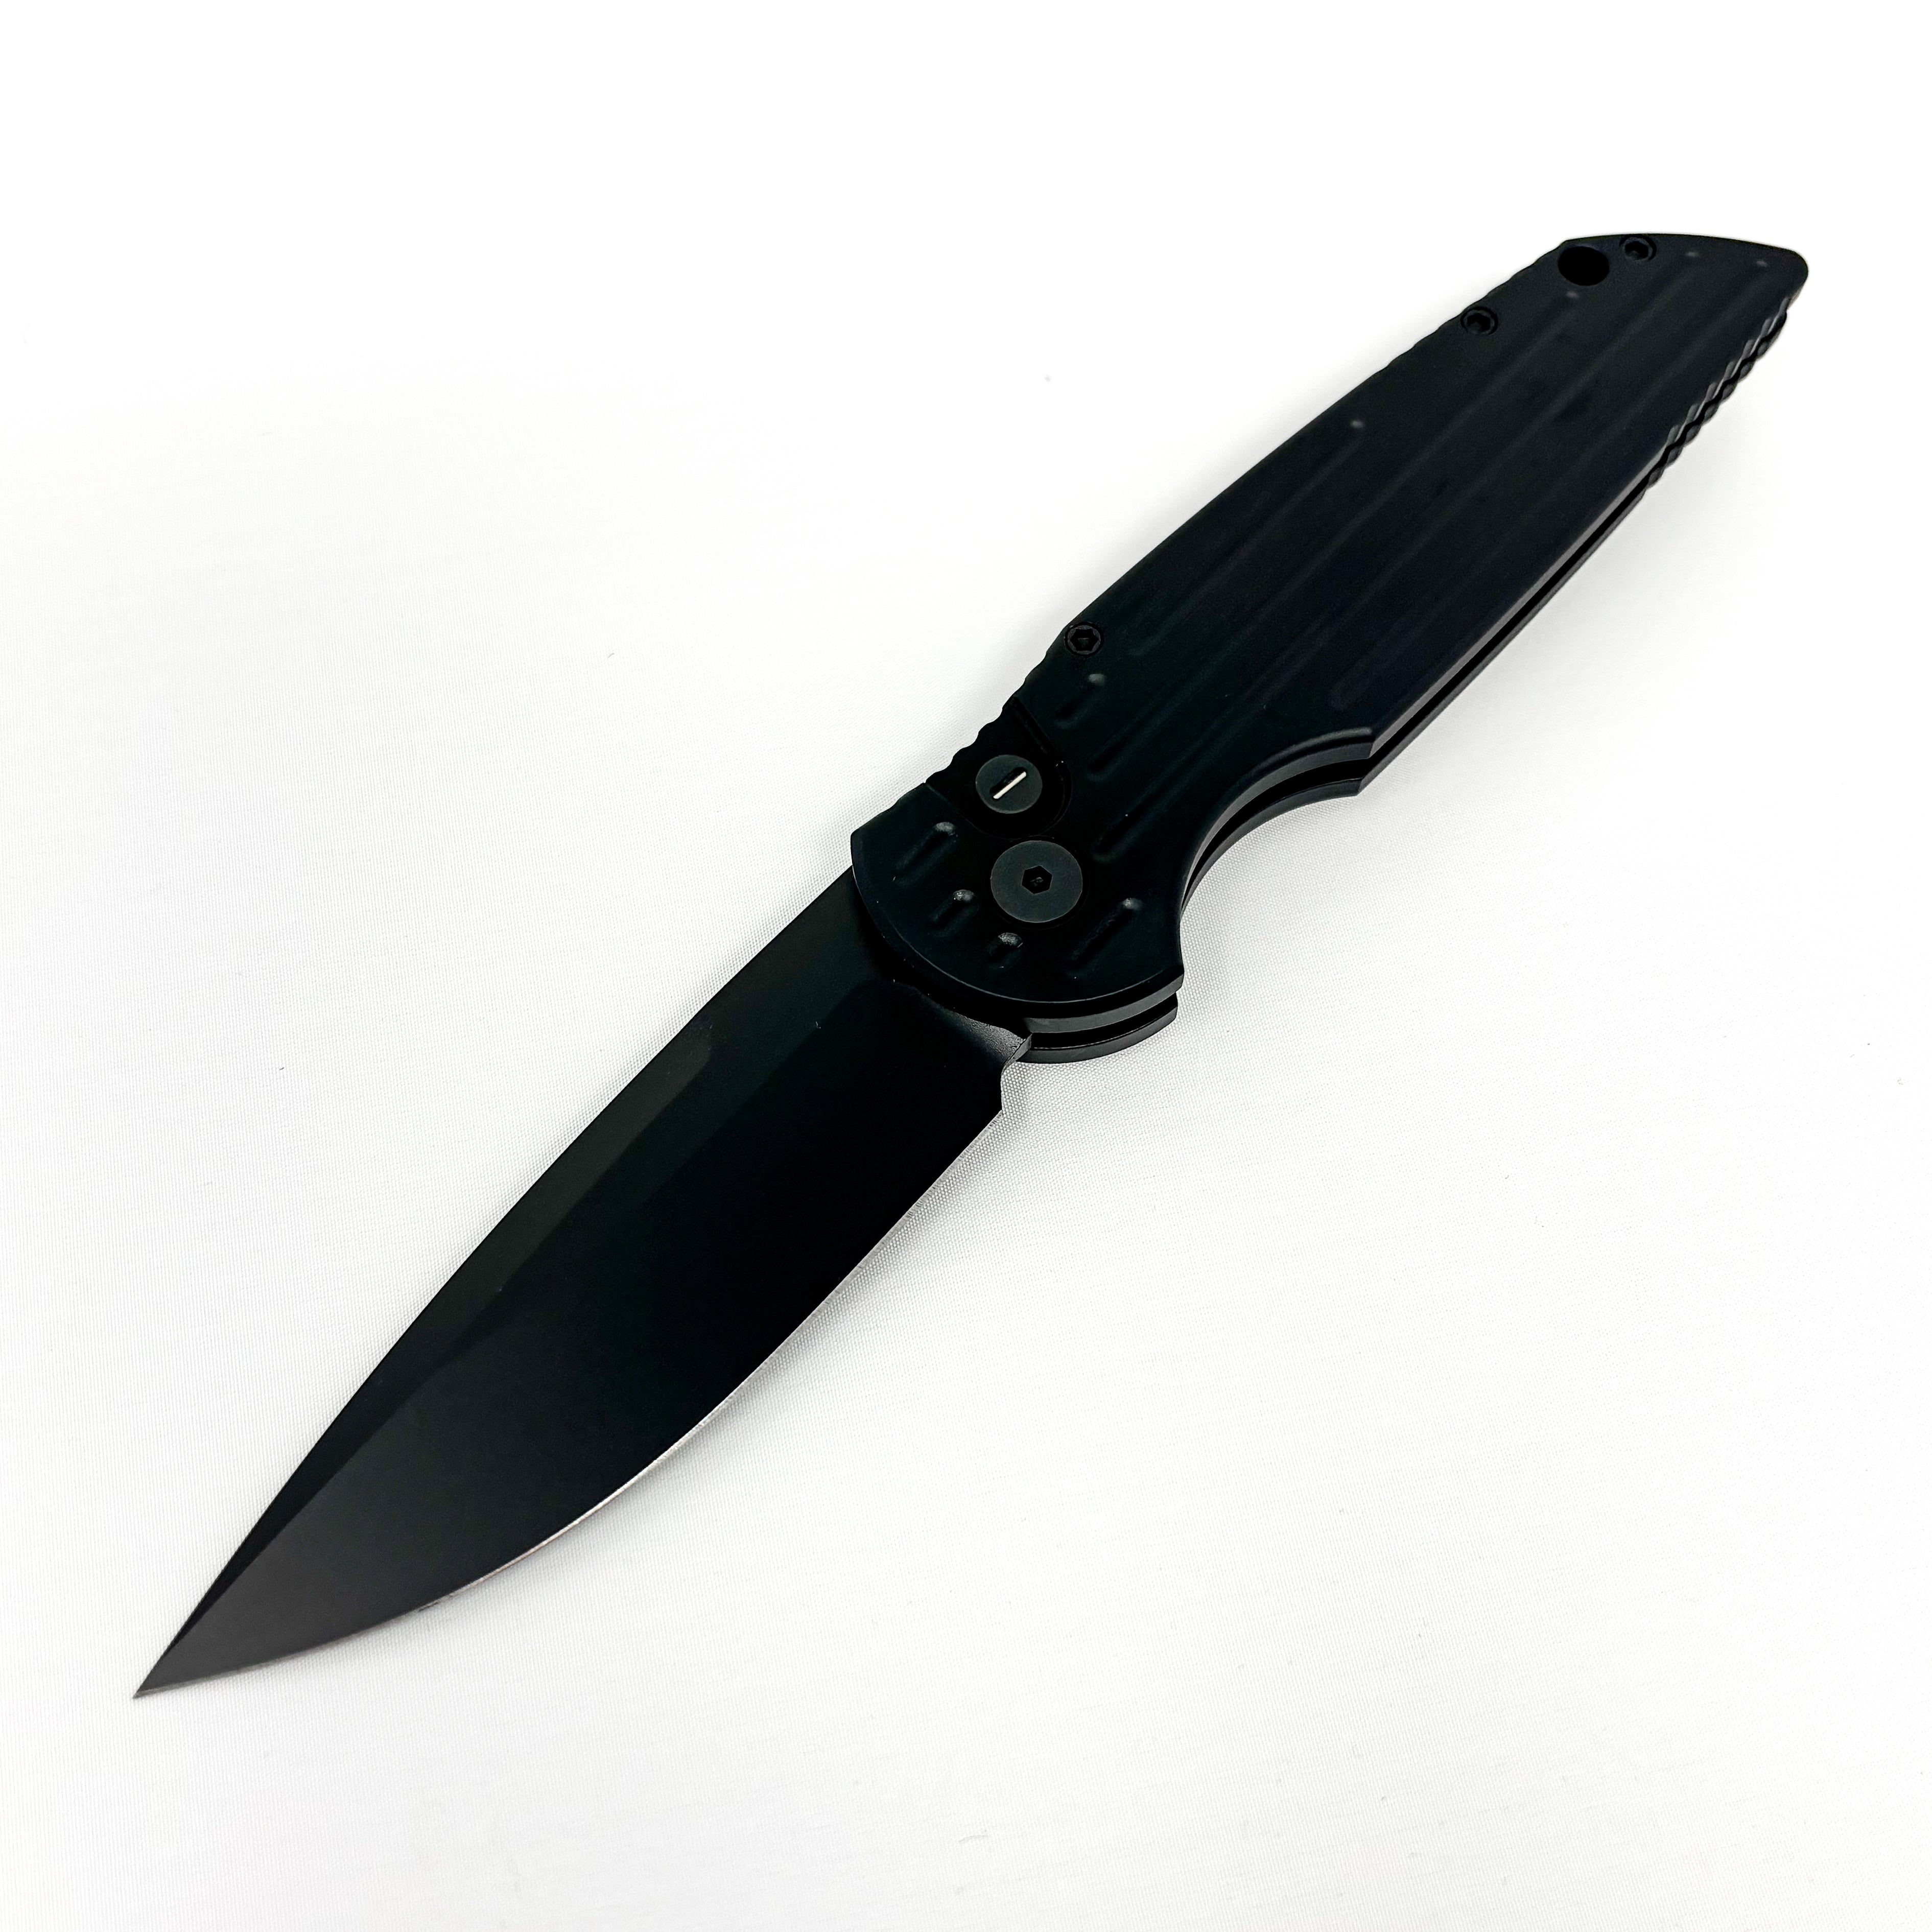 Pro-Tech Knives Tactical Response 3 - Operator Edition - Black Handle & Blade - TR-3 SWAT Operator